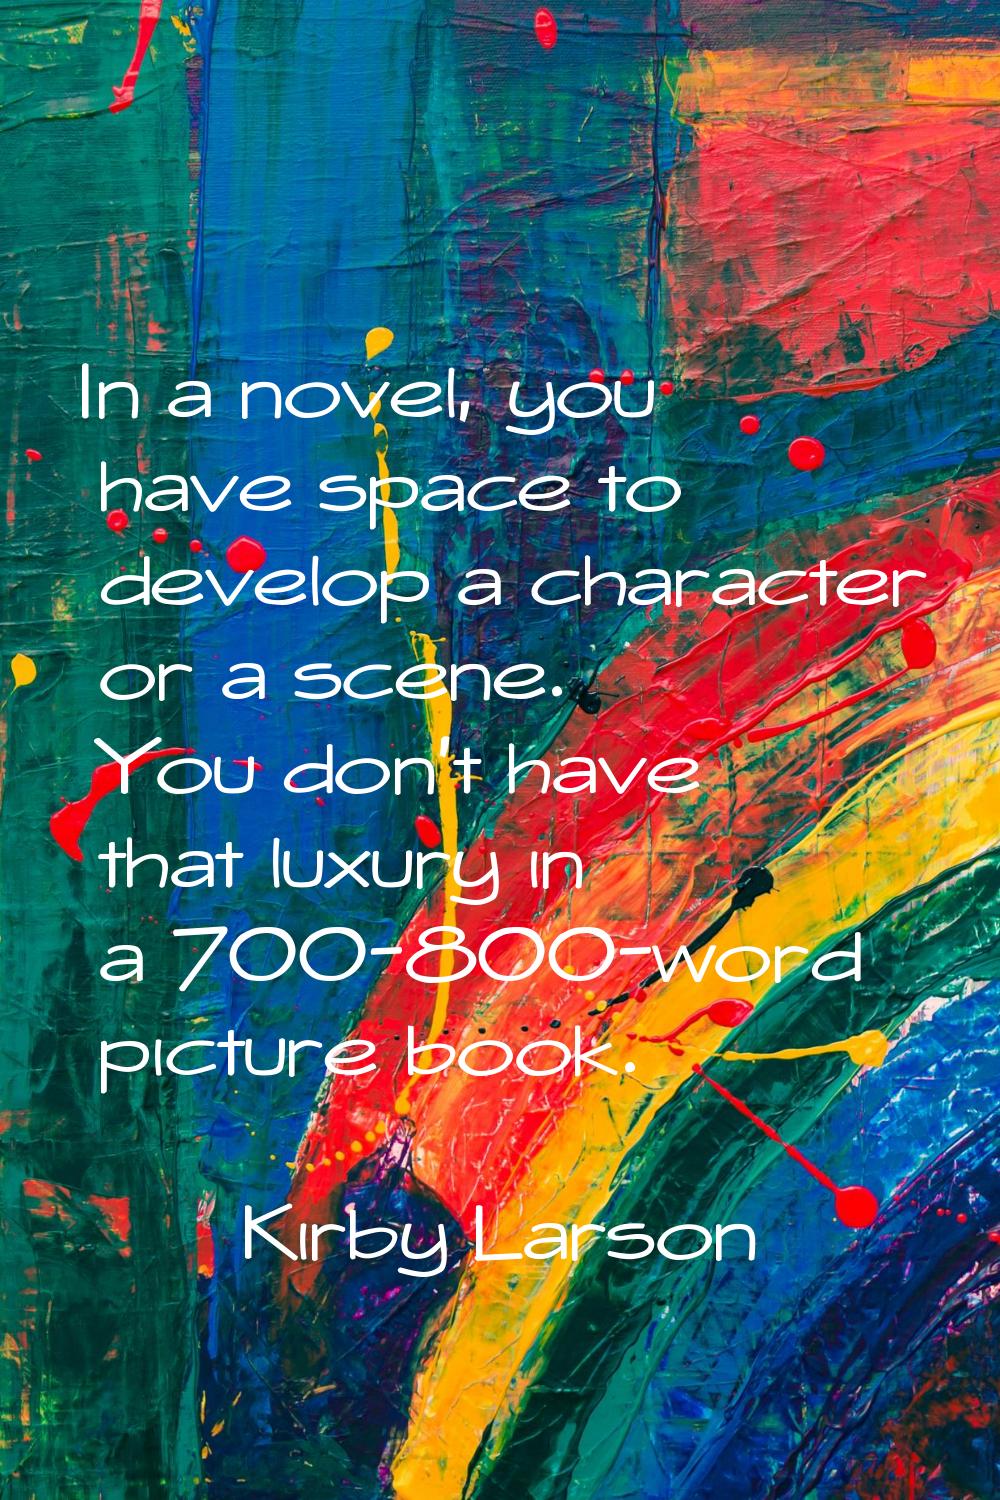 In a novel, you have space to develop a character or a scene. You don't have that luxury in a 700-8